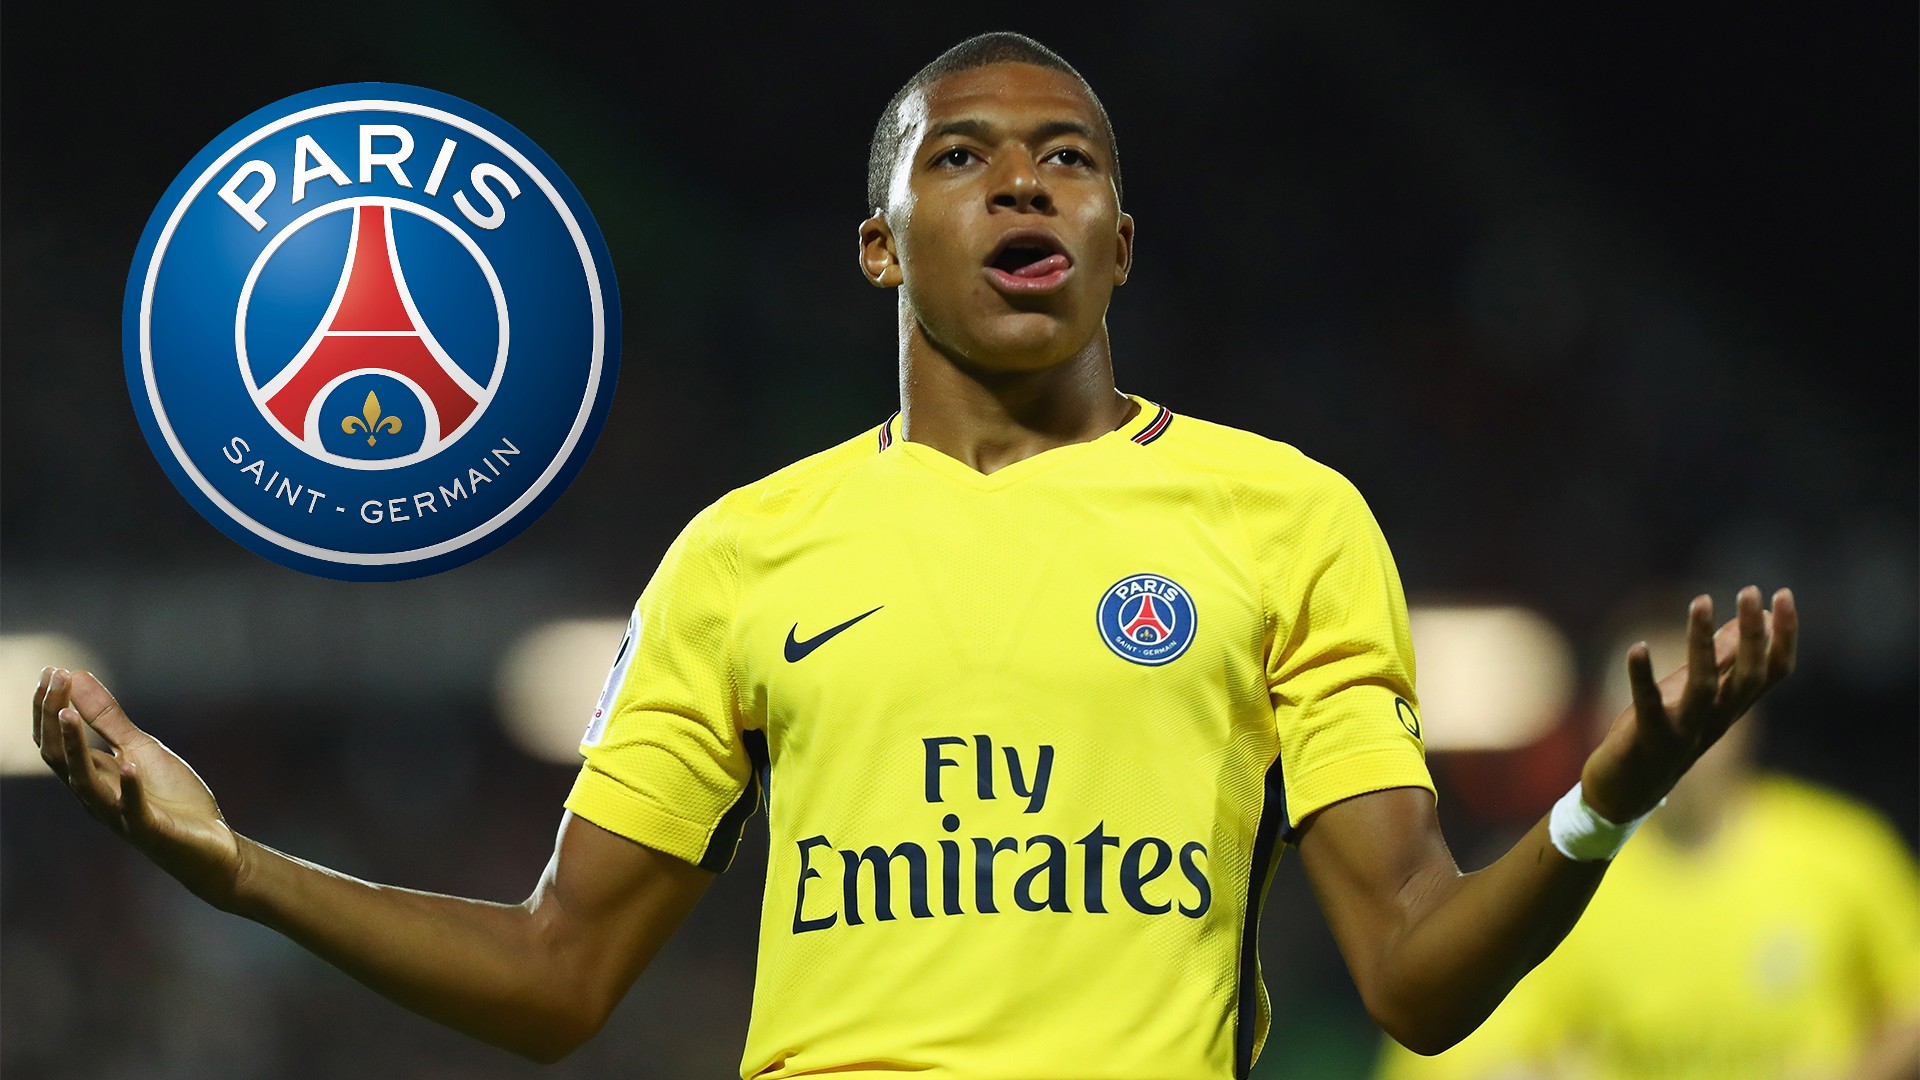 PSG Kylian Mbappe HD Wallpapers with resolution 1920x1080 pixel. You can make this wallpaper for your Mac or Windows Desktop Background, iPhone, Android or Tablet and another Smartphone device